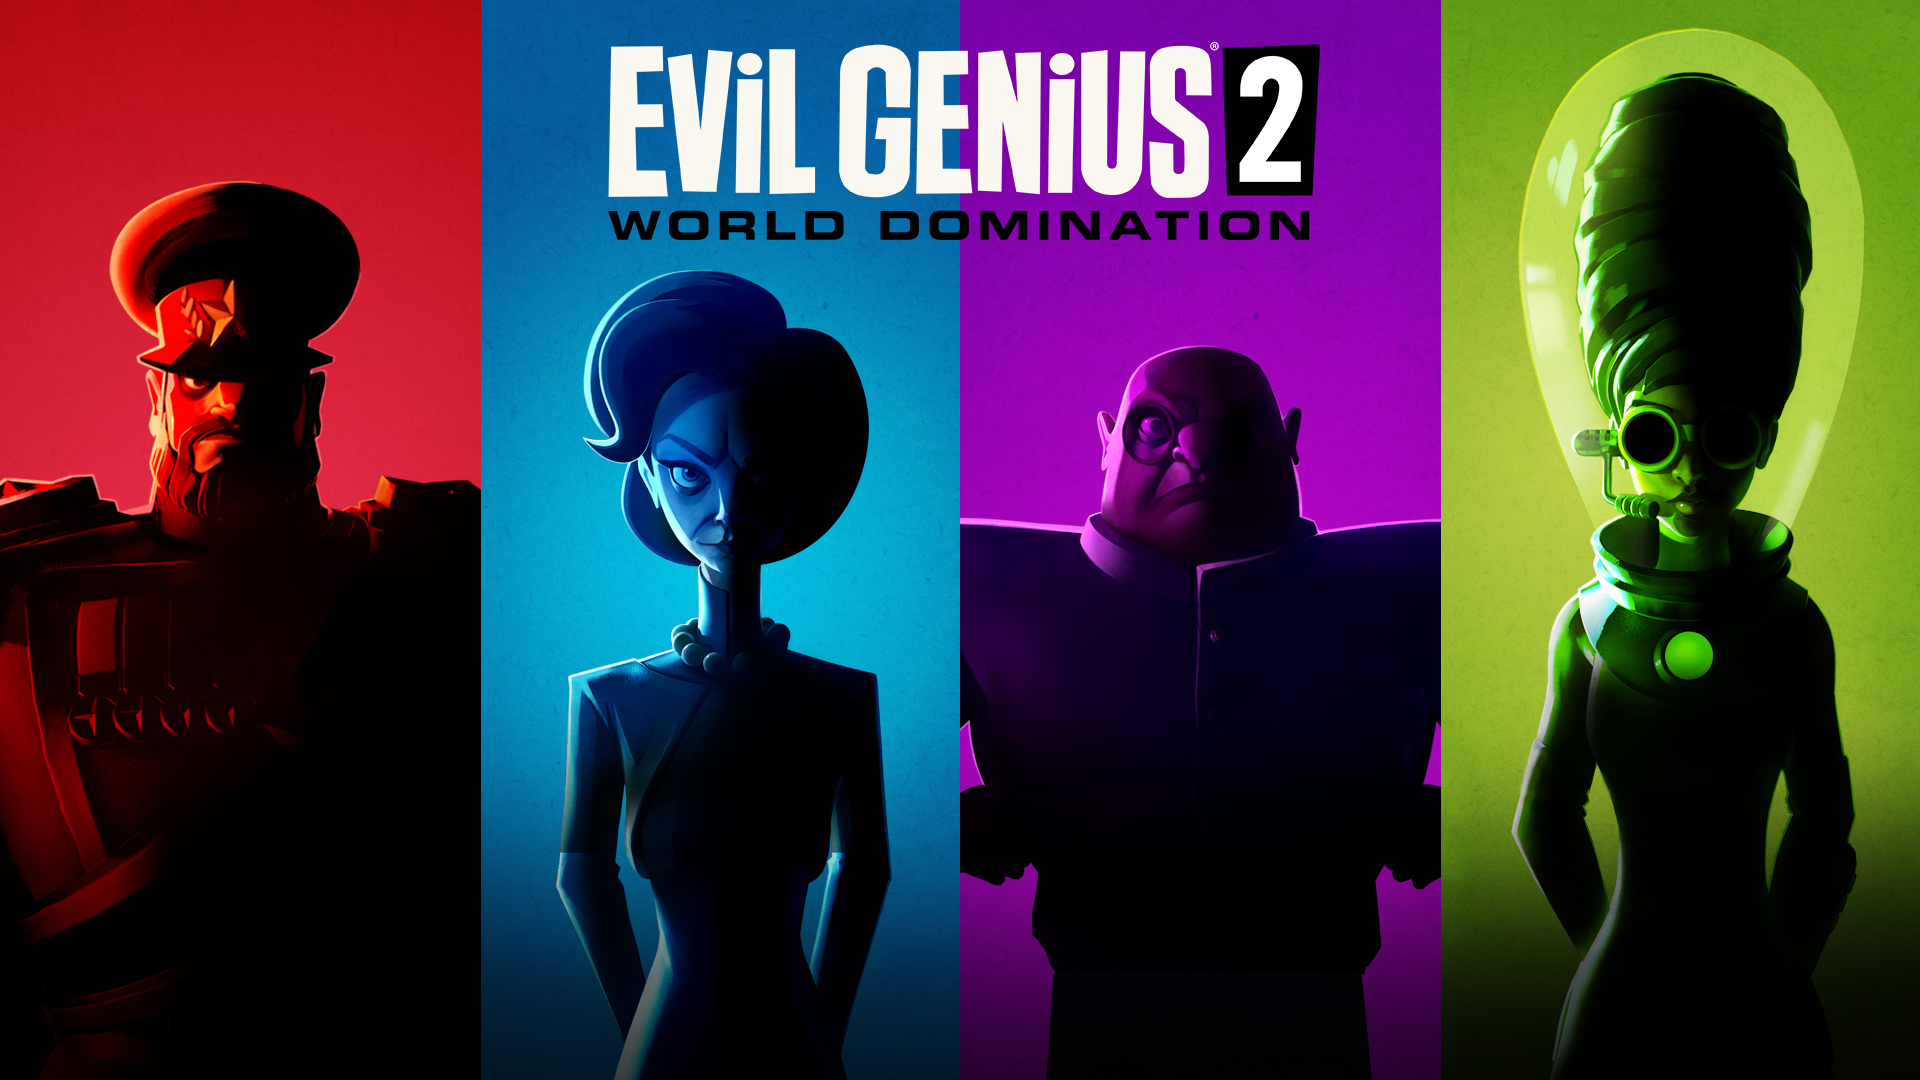 Today, a blog post. Next year, Evil Genius 2: World Domination!